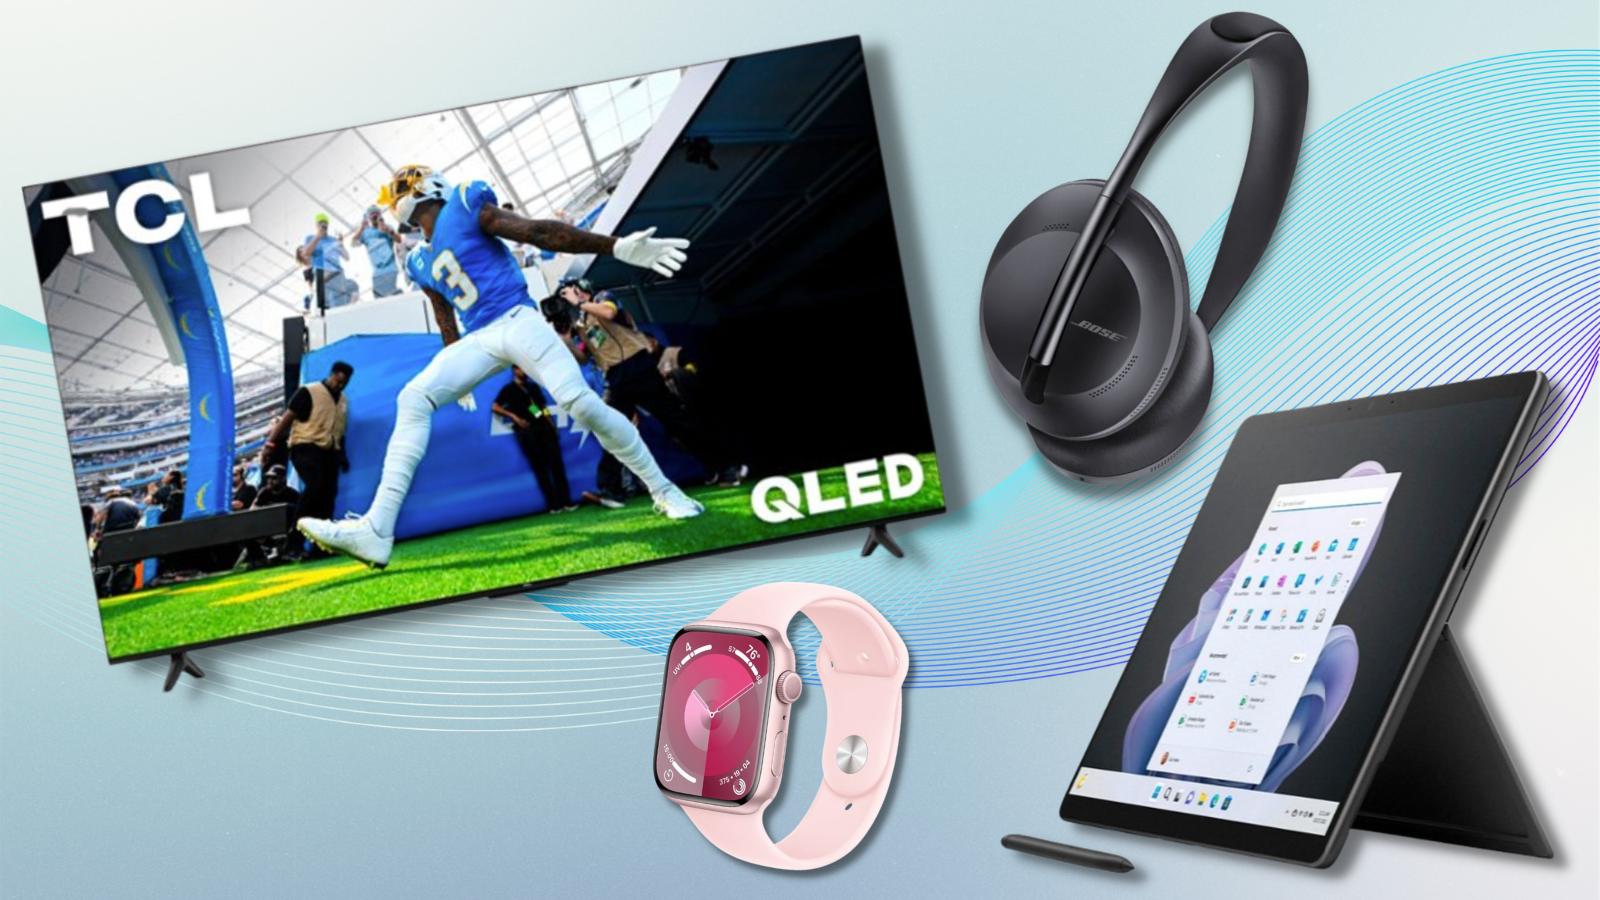 TCL Tv, Apple watch, Bose headphones, and Microsoft surface pro with blue gradient background